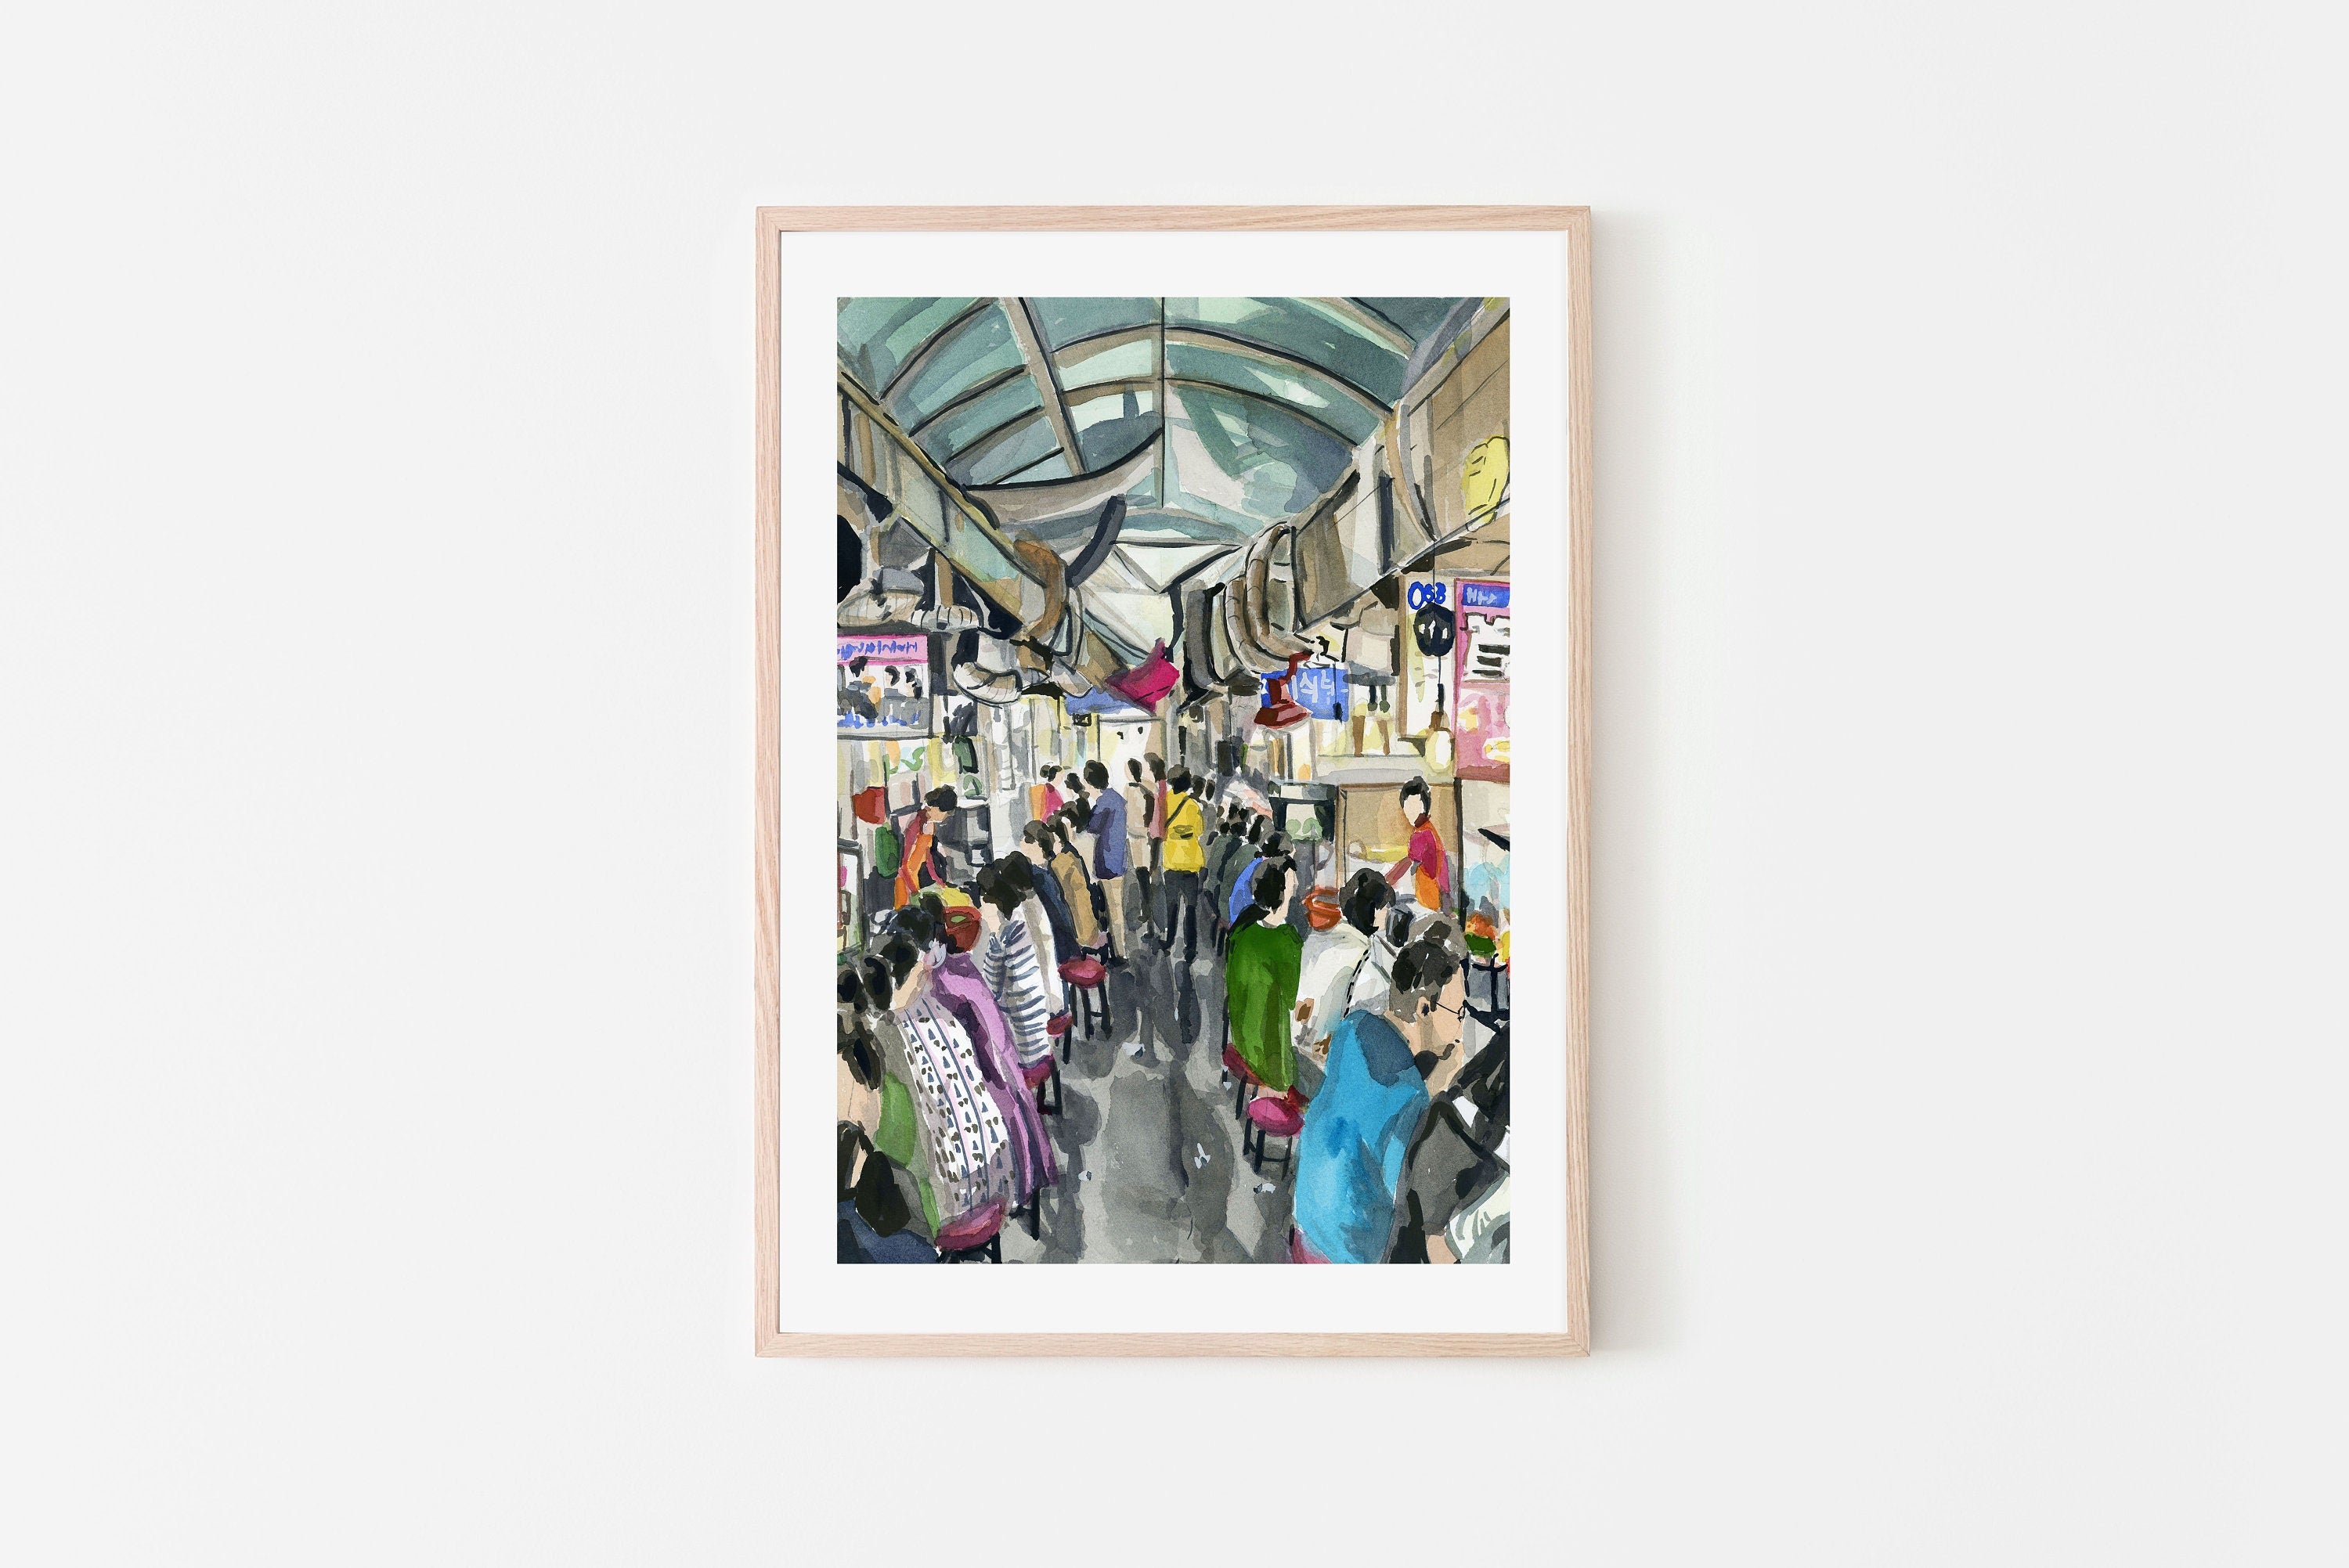 Korean street market alley print of painting by Medjool Studio. Print of original gouache painting featuring a scene from a Korean market in Busan, South Korea. 